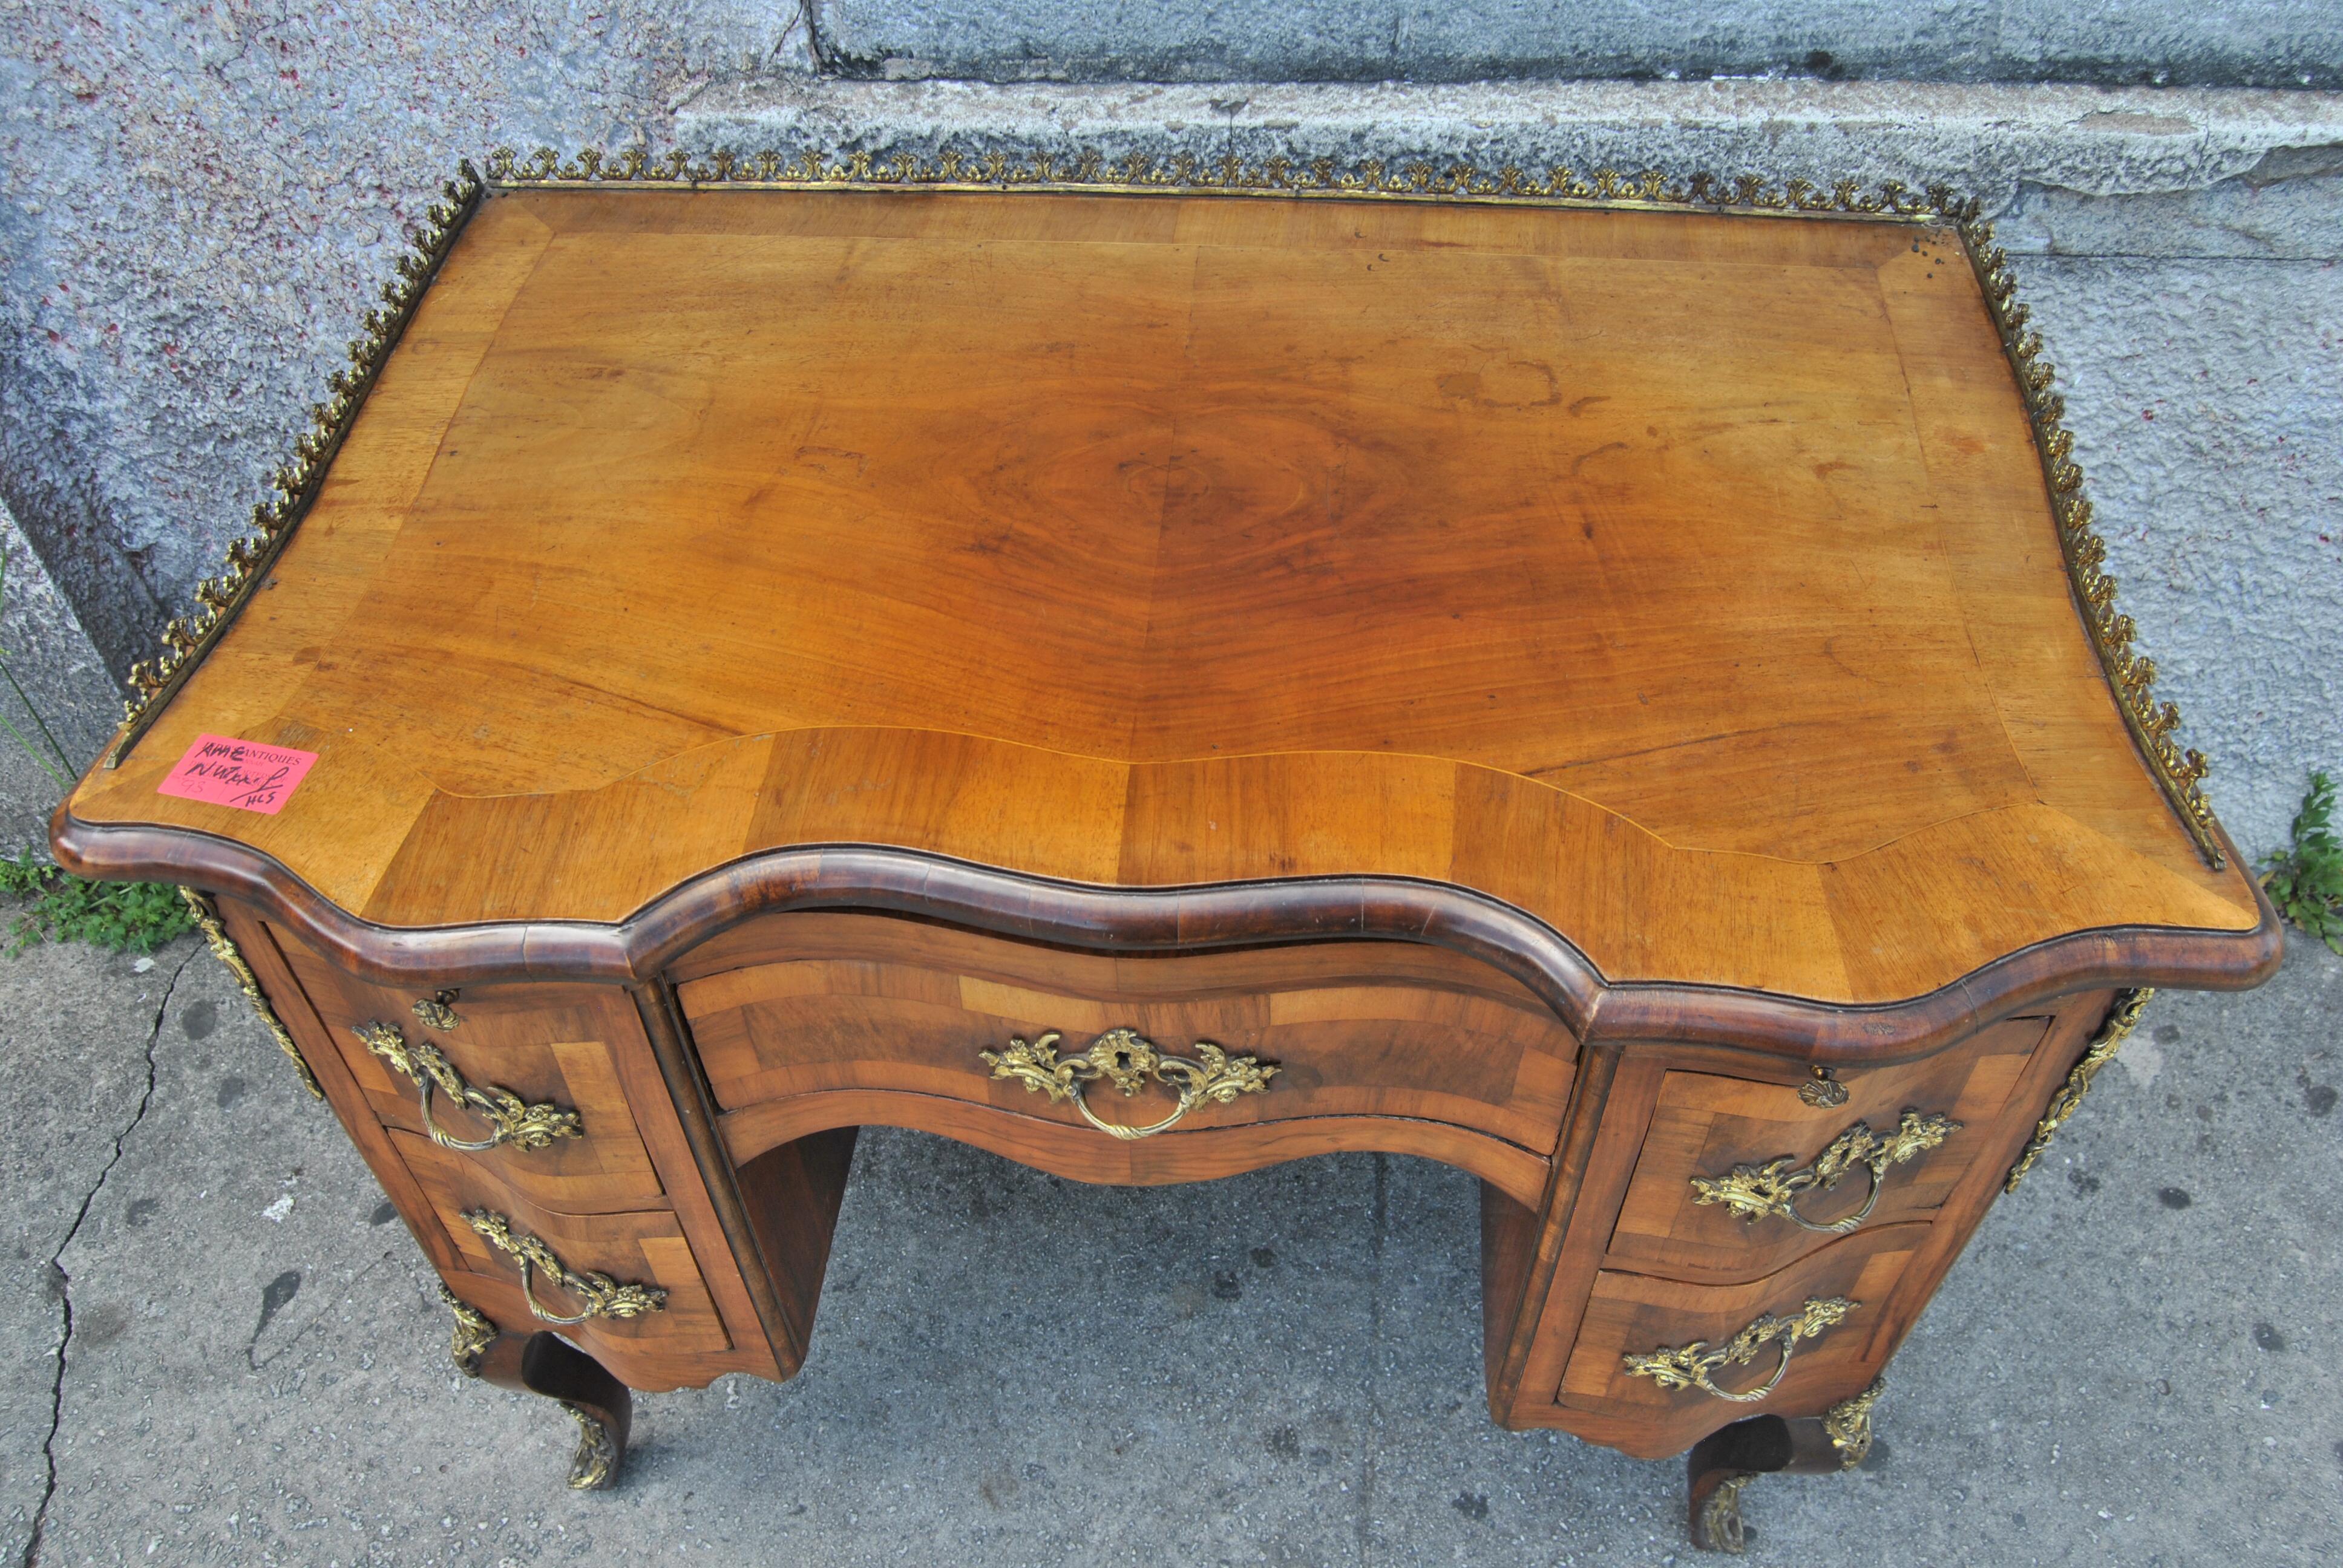 This is a desk / writing table / dressing table / side table made in France, circa 1910. The top is beautifully shaped and has cross cut molding. There is a fabulous pierced Brass Gallery on the right and left sides and on the back of the top. The